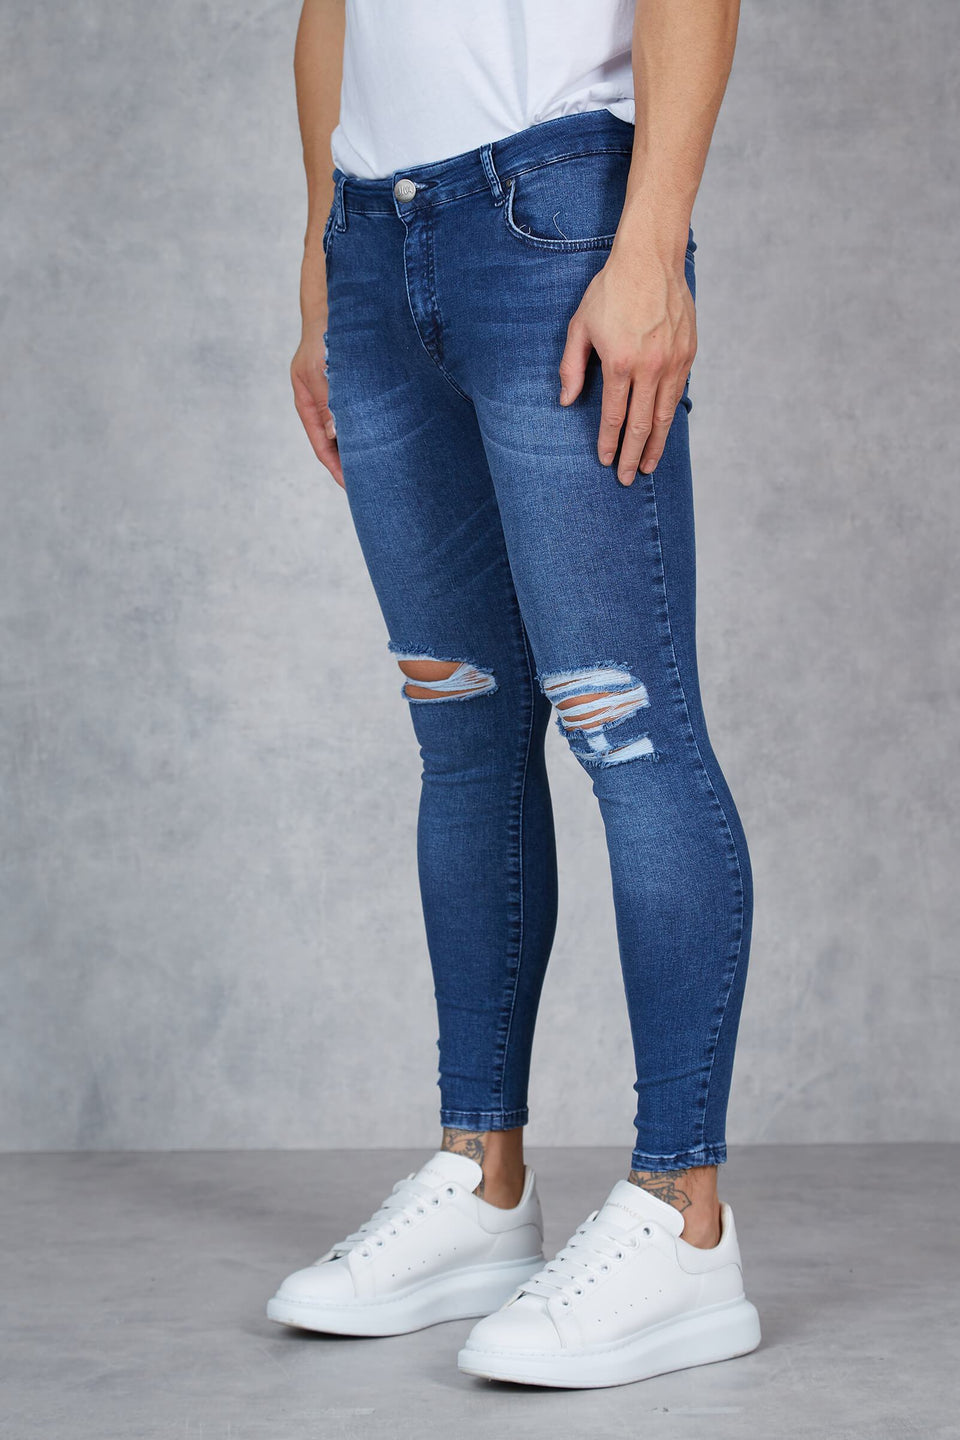 F1 - Luther Knee Rip Super Spray On Skinny Jeans - Blue